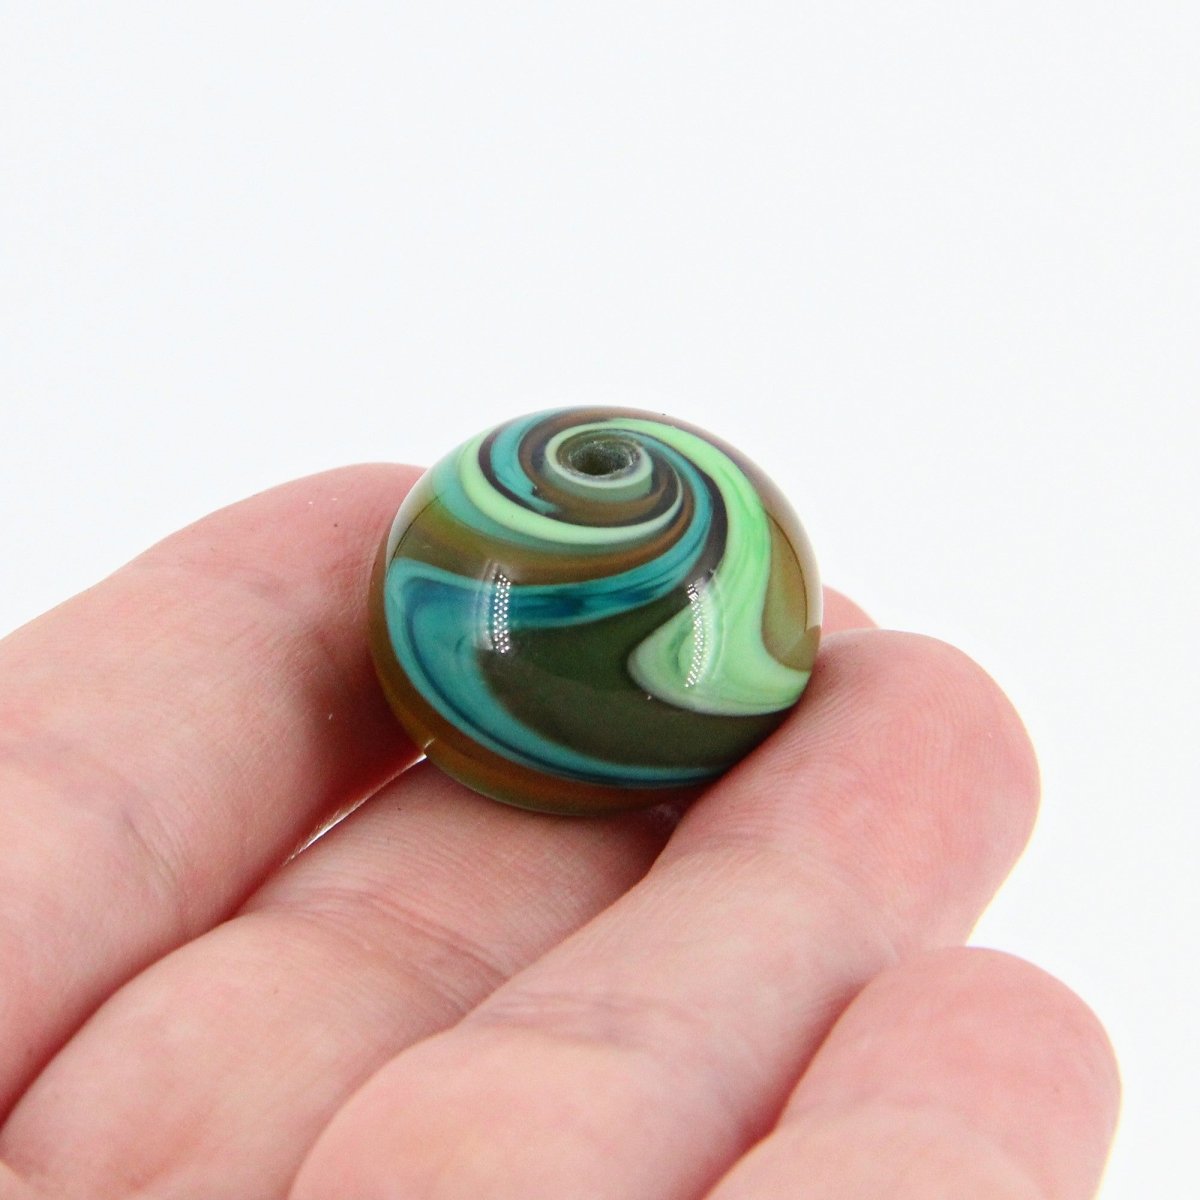 Green Striped Statement Bead - Handmade Glass Lampwork, Unique Focal Bead for Pendant, Suncatcher, or Home Decorating